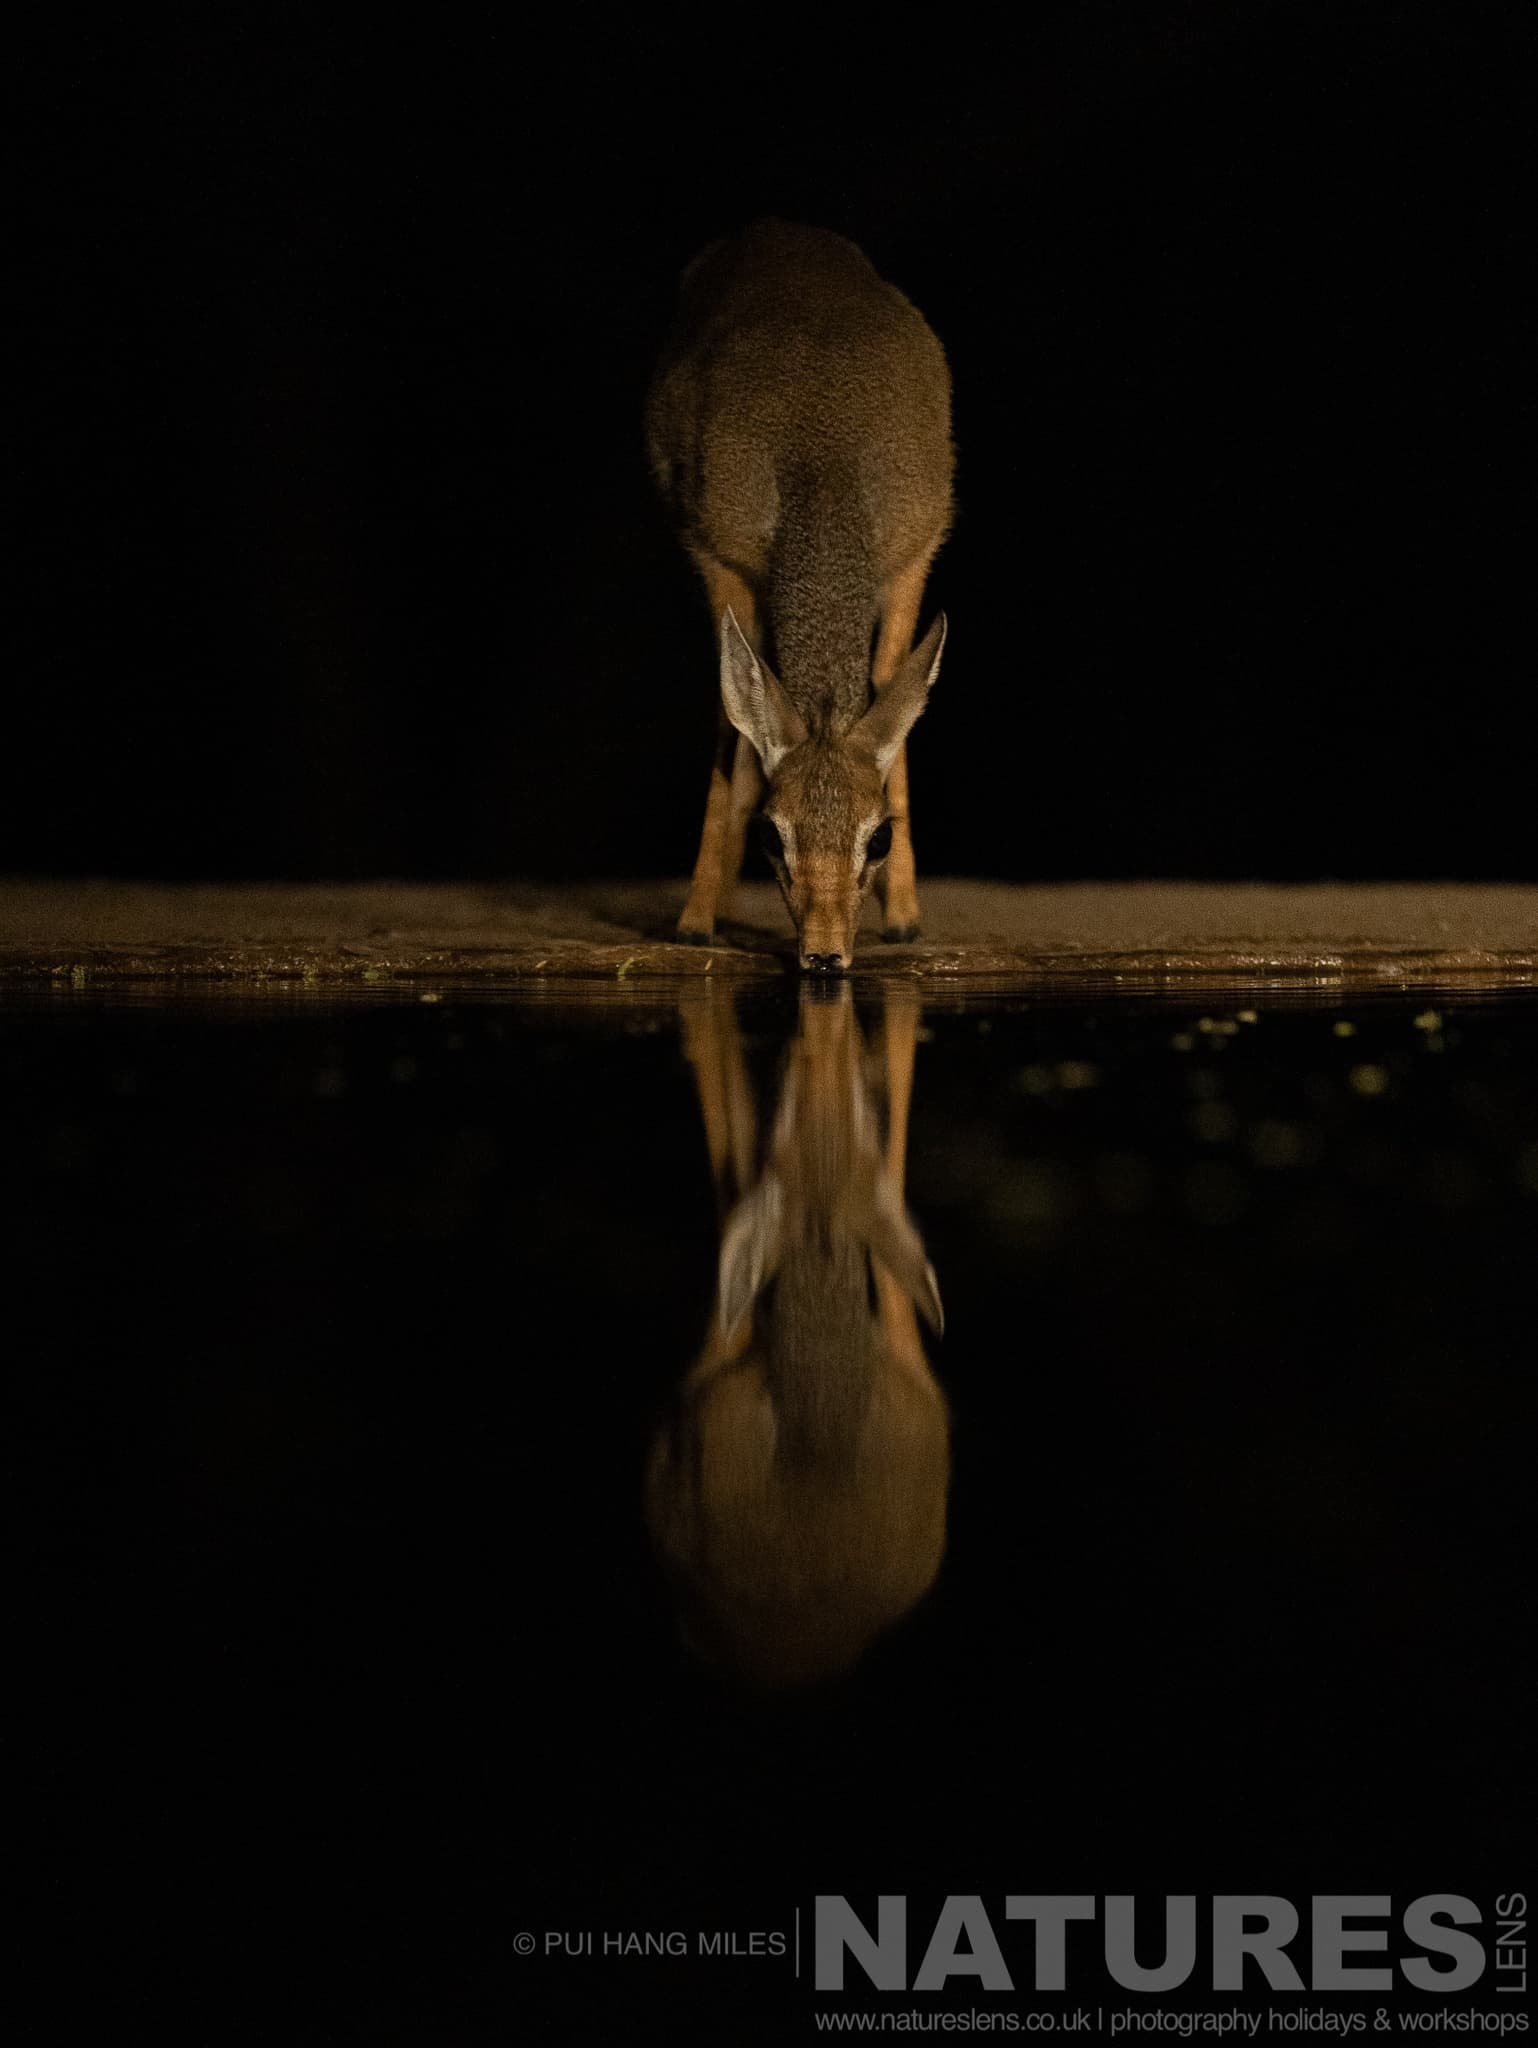 An image typical of those which we hope you will have opportunities to capture during the African Wildlife by Night & Day photography holiday